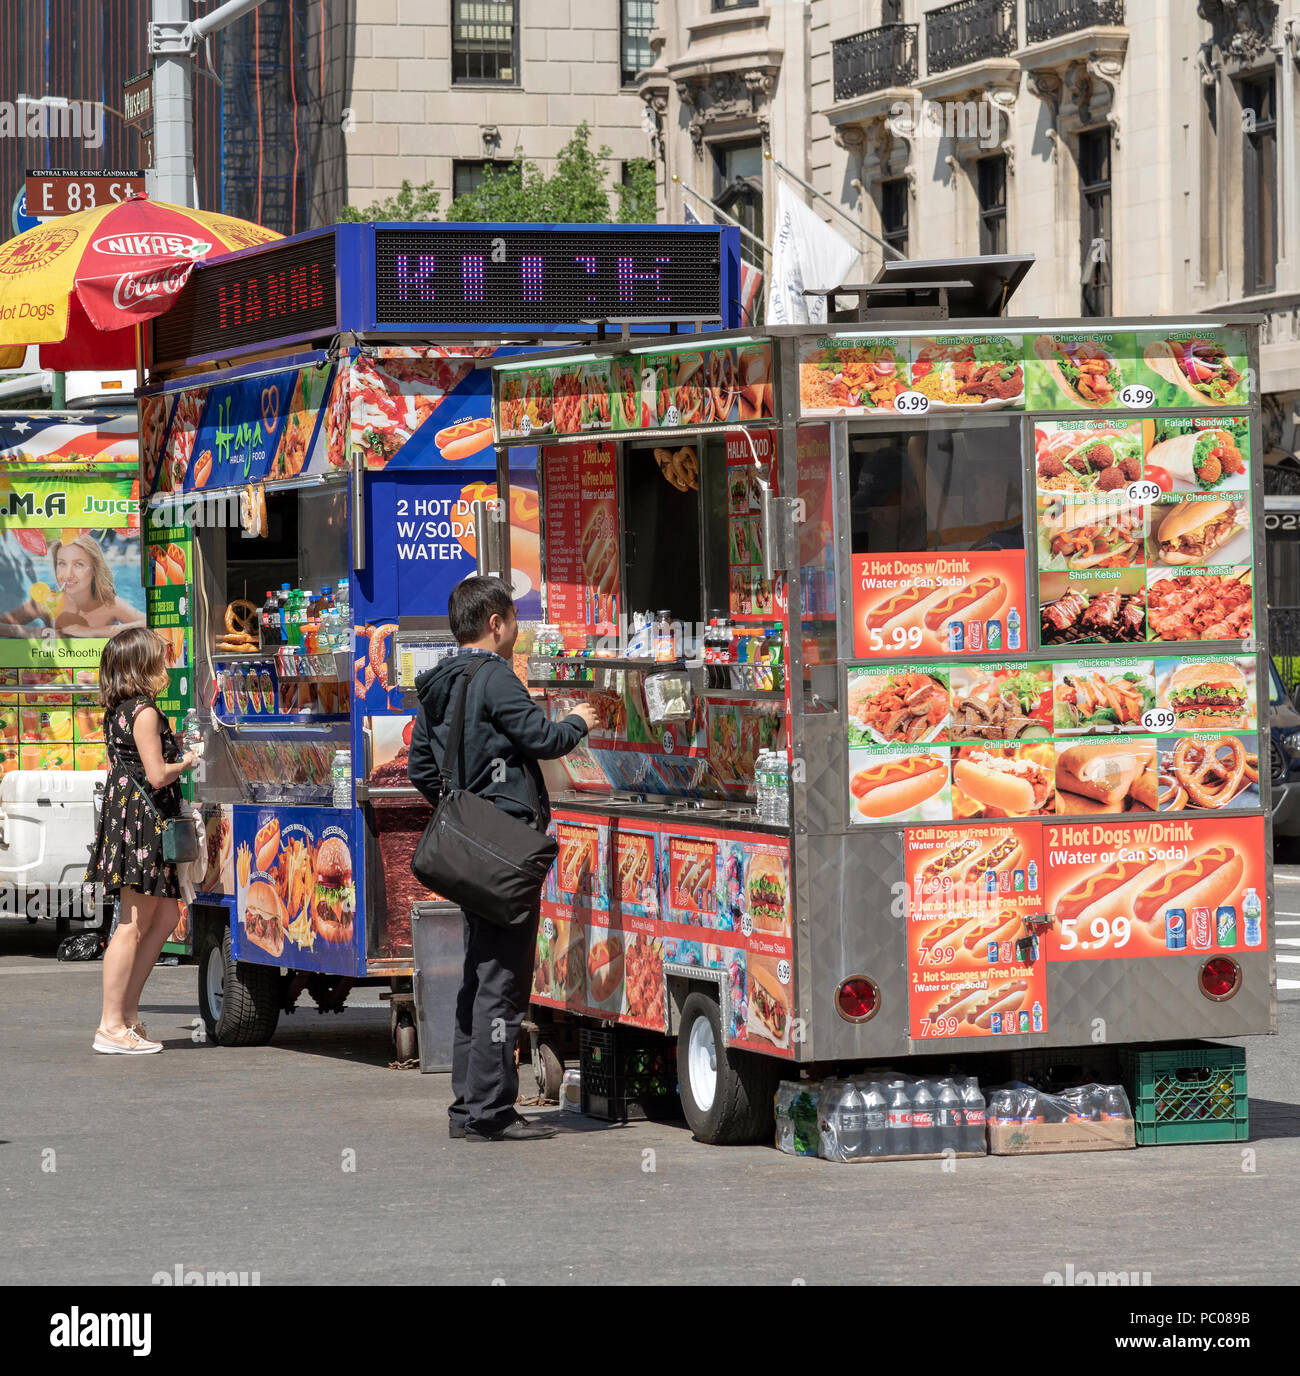 Museum Mile, 5th Avenue, New York, USA. Street food vendors and customers on the sidewalk. Stock Photo